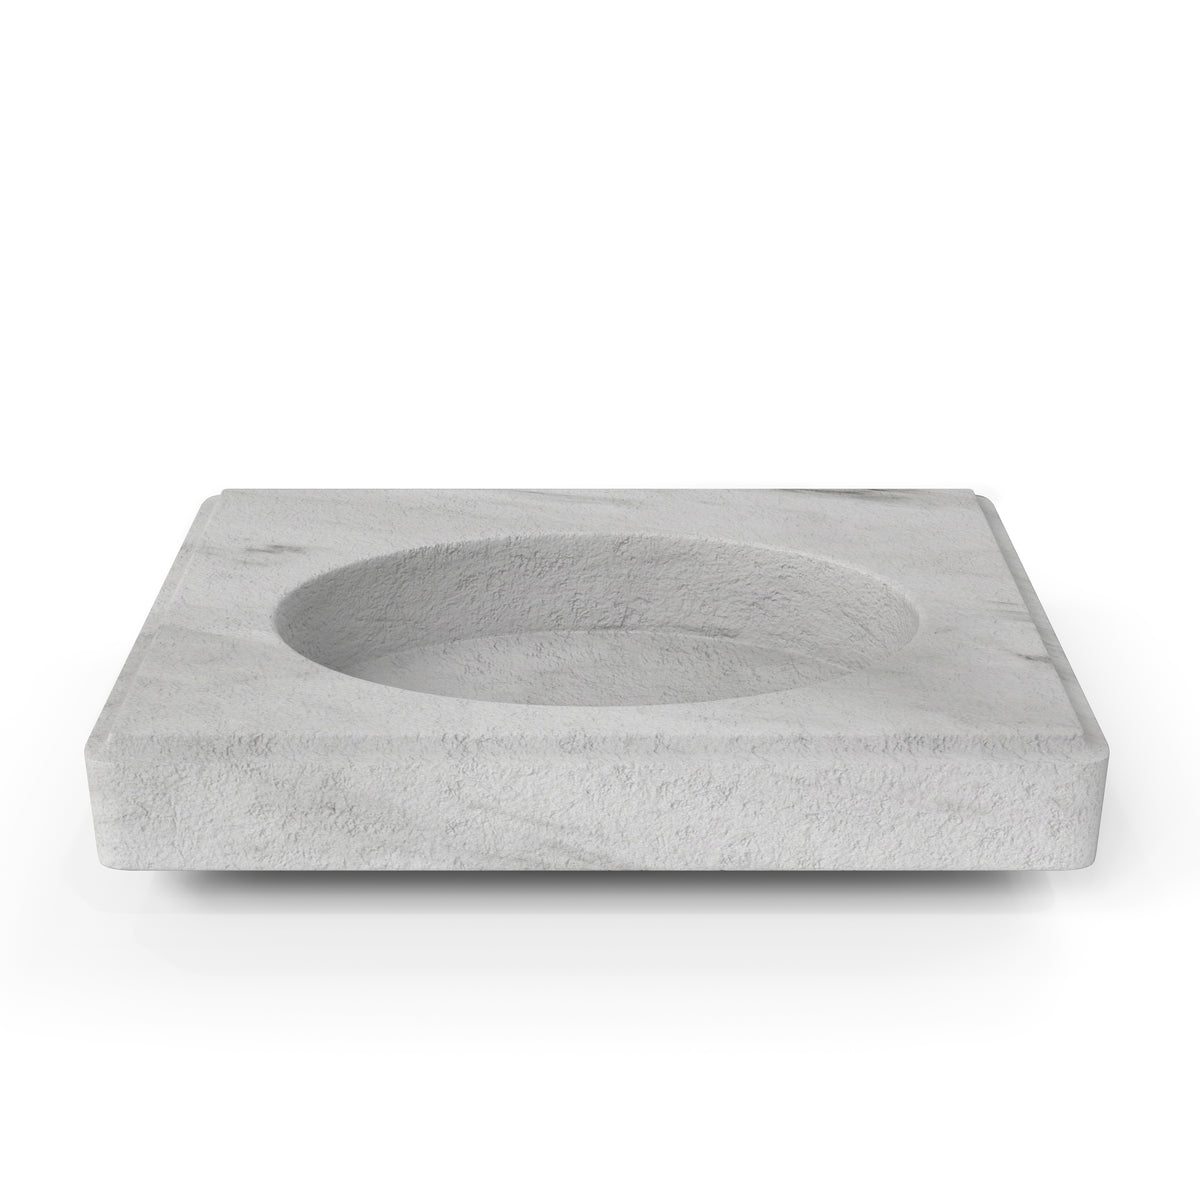 Angelo Sink shown in Danby Marble. Main Product Slider View